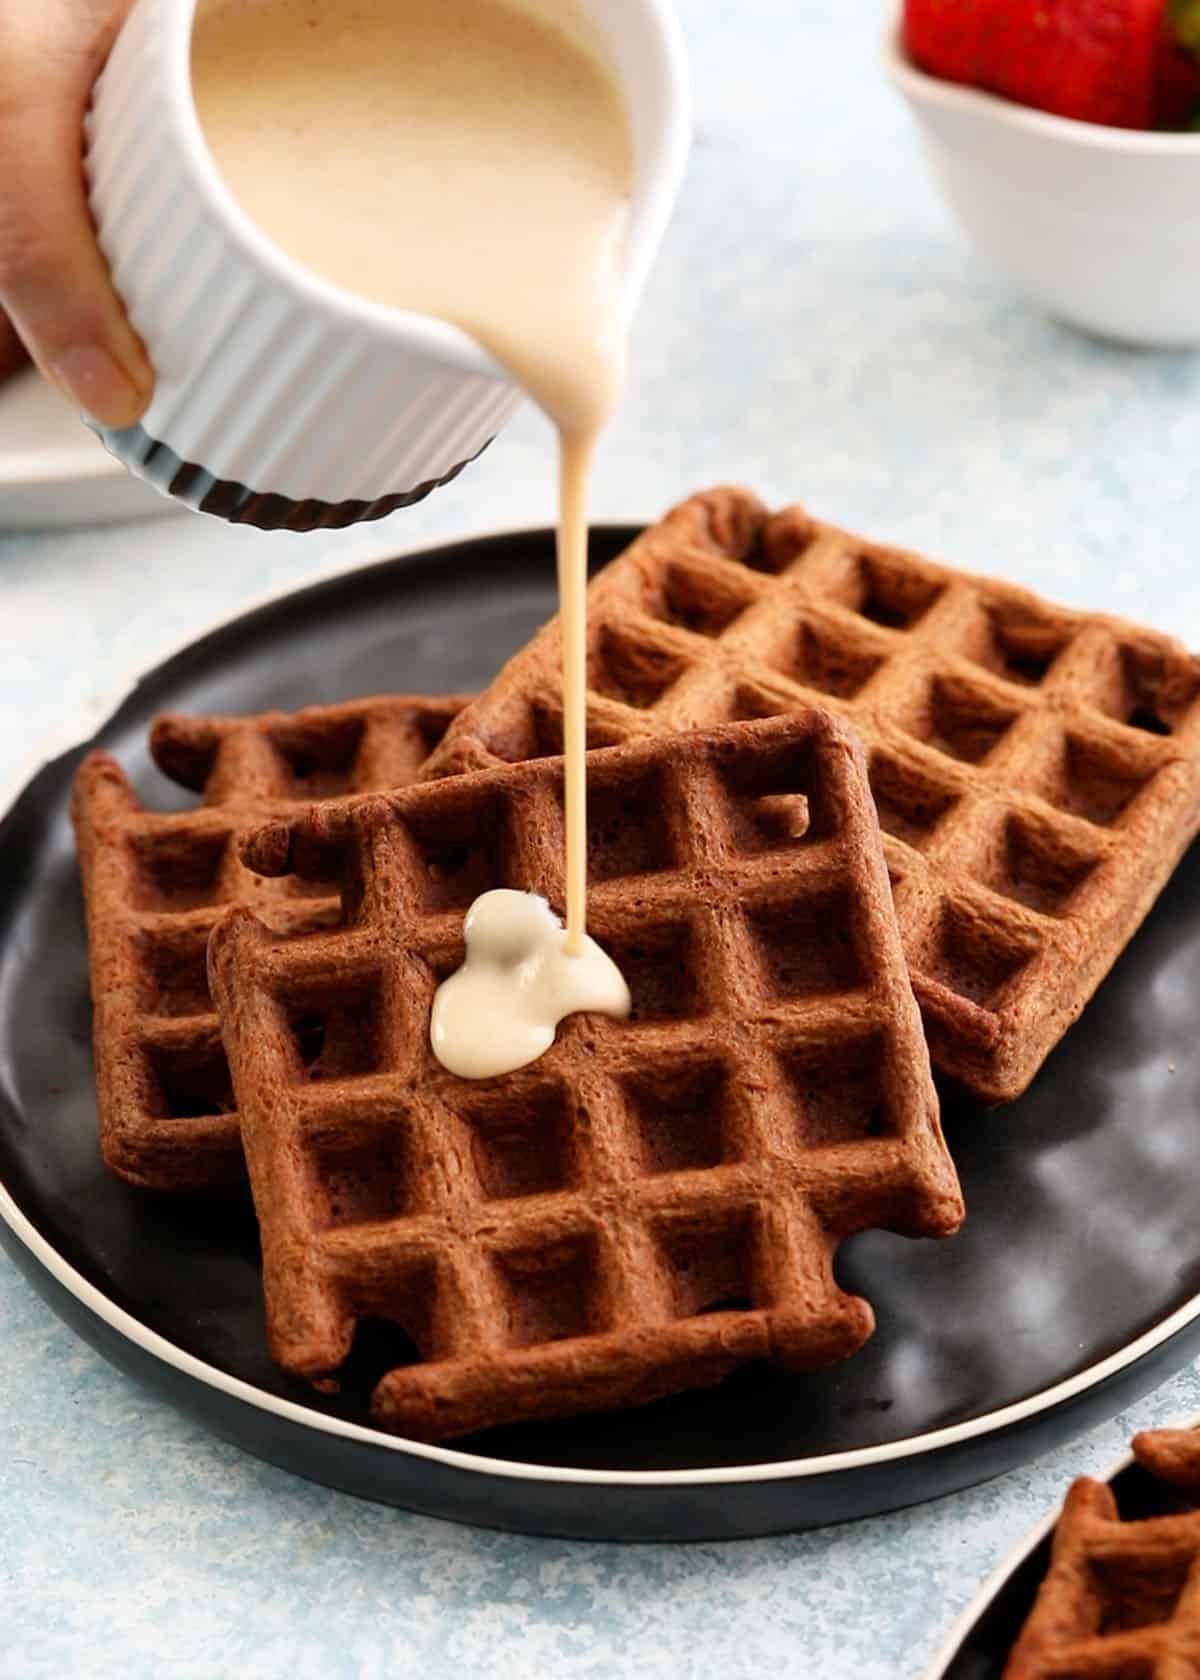 a hand pouring white sauce on top of three brown chocolate waffles placed on a black plate.